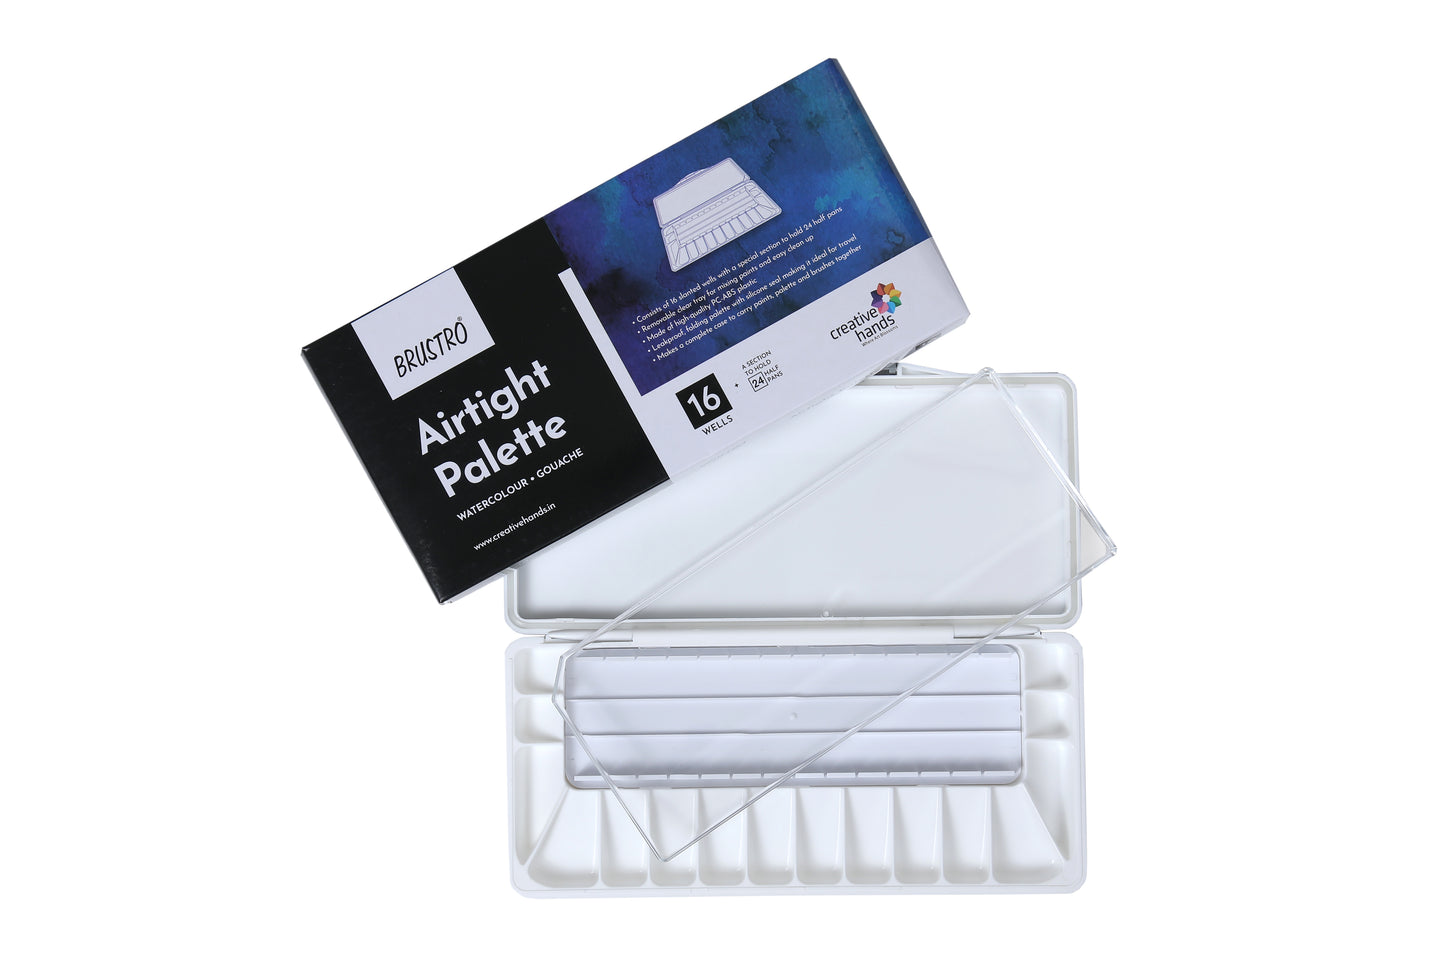 BRUSTRO Artists’ AIRTIGHT Palette 16 Wells for Watercolour and Gouache with a Special Section to Hold 24 Half Pans and a Removable Clear Tray